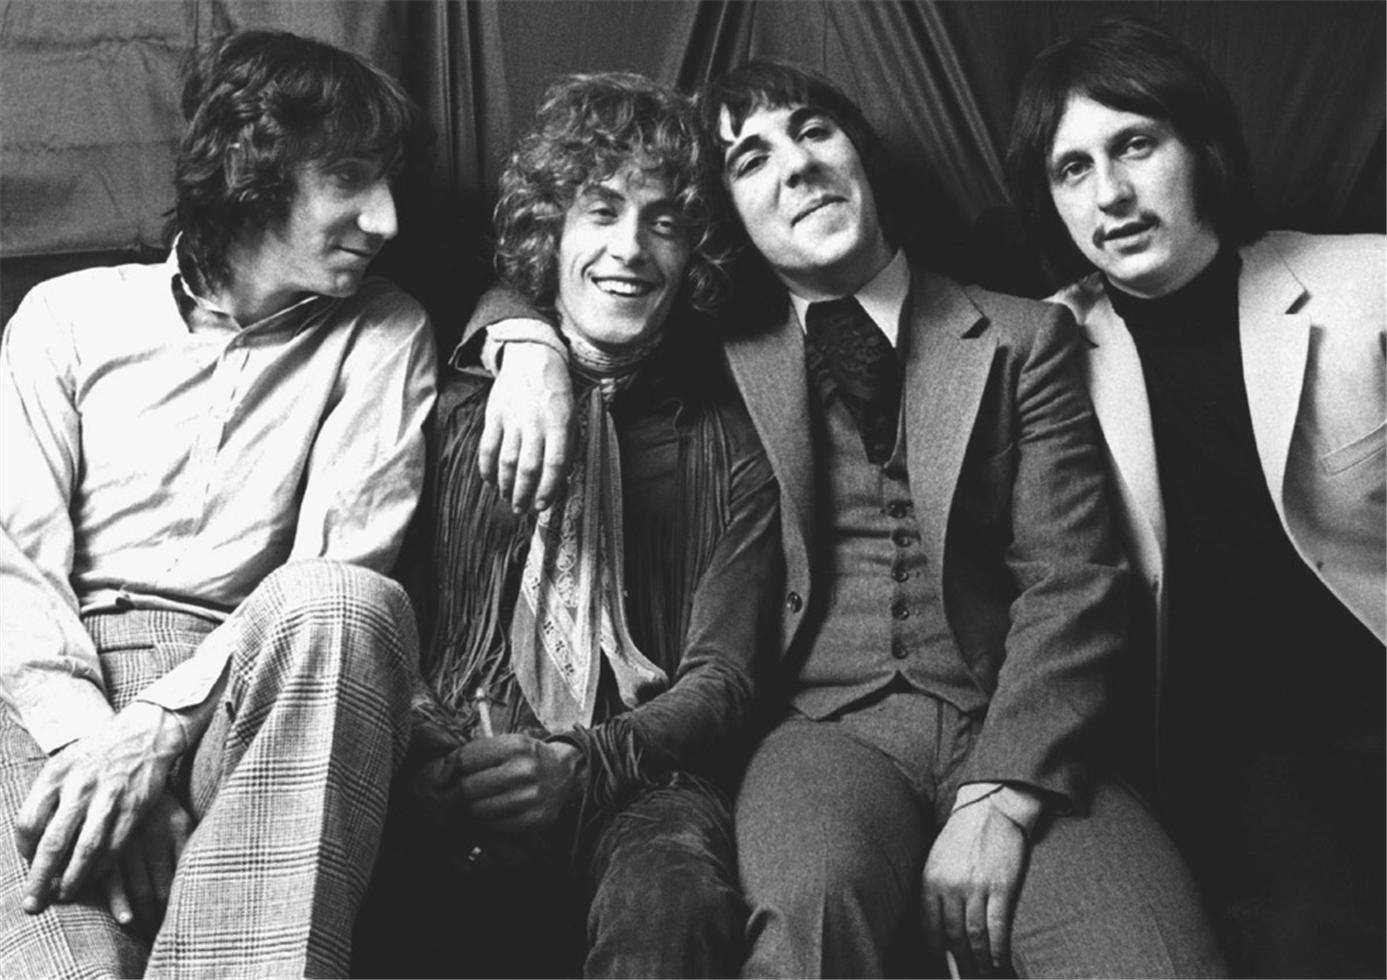 Barrie Wentzell Portrait Photograph - The Who, The Melody Maker Awards, London, 1969